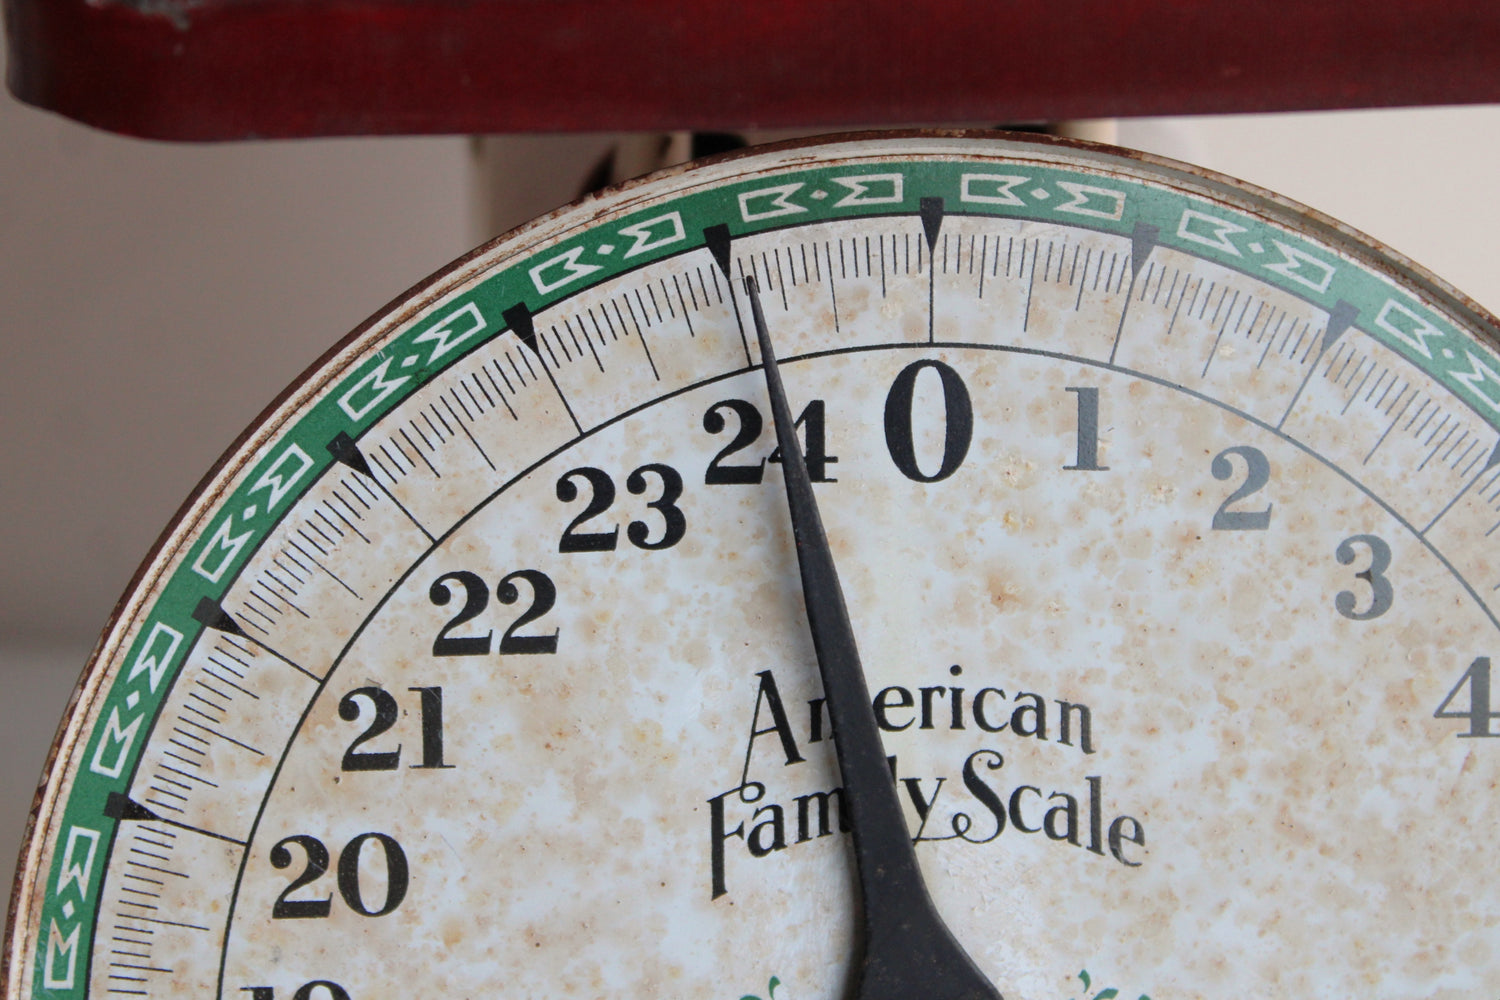 Vintage Official Weight Watchers Brand Food Scale, 1950's or